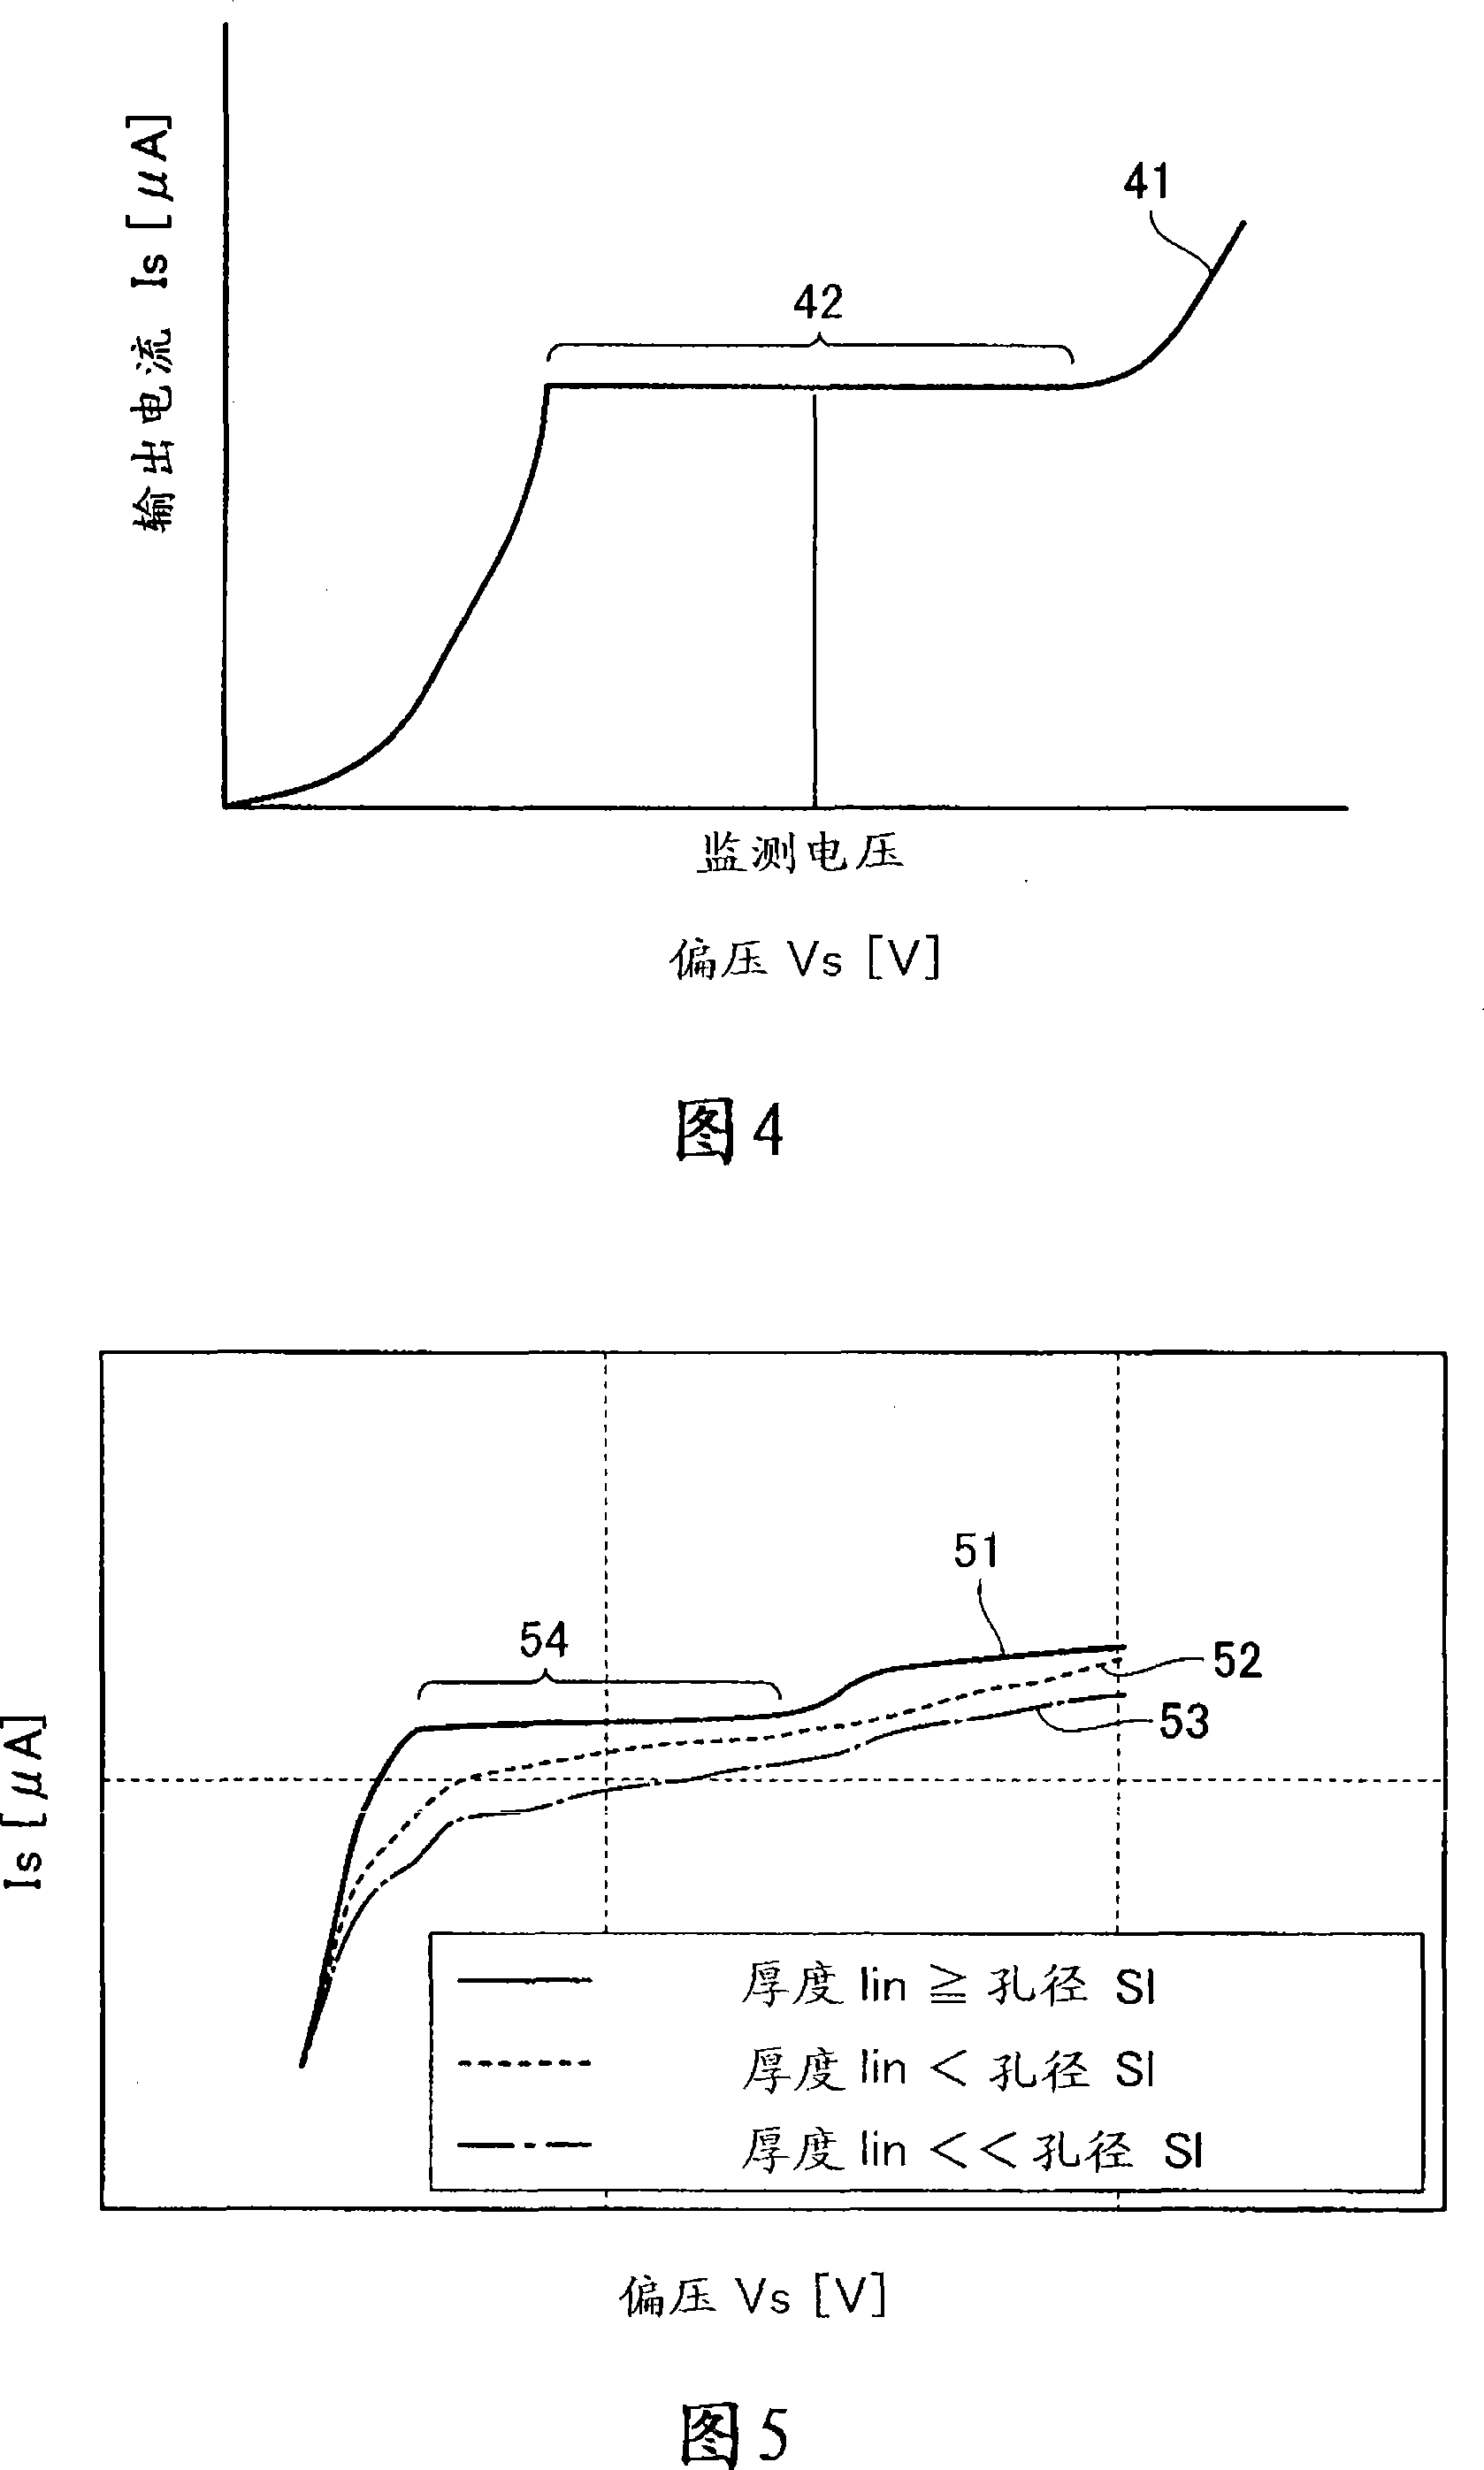 Limiting current type oxygen sensor and method of sensing and measuring oxygen concentrations using the same